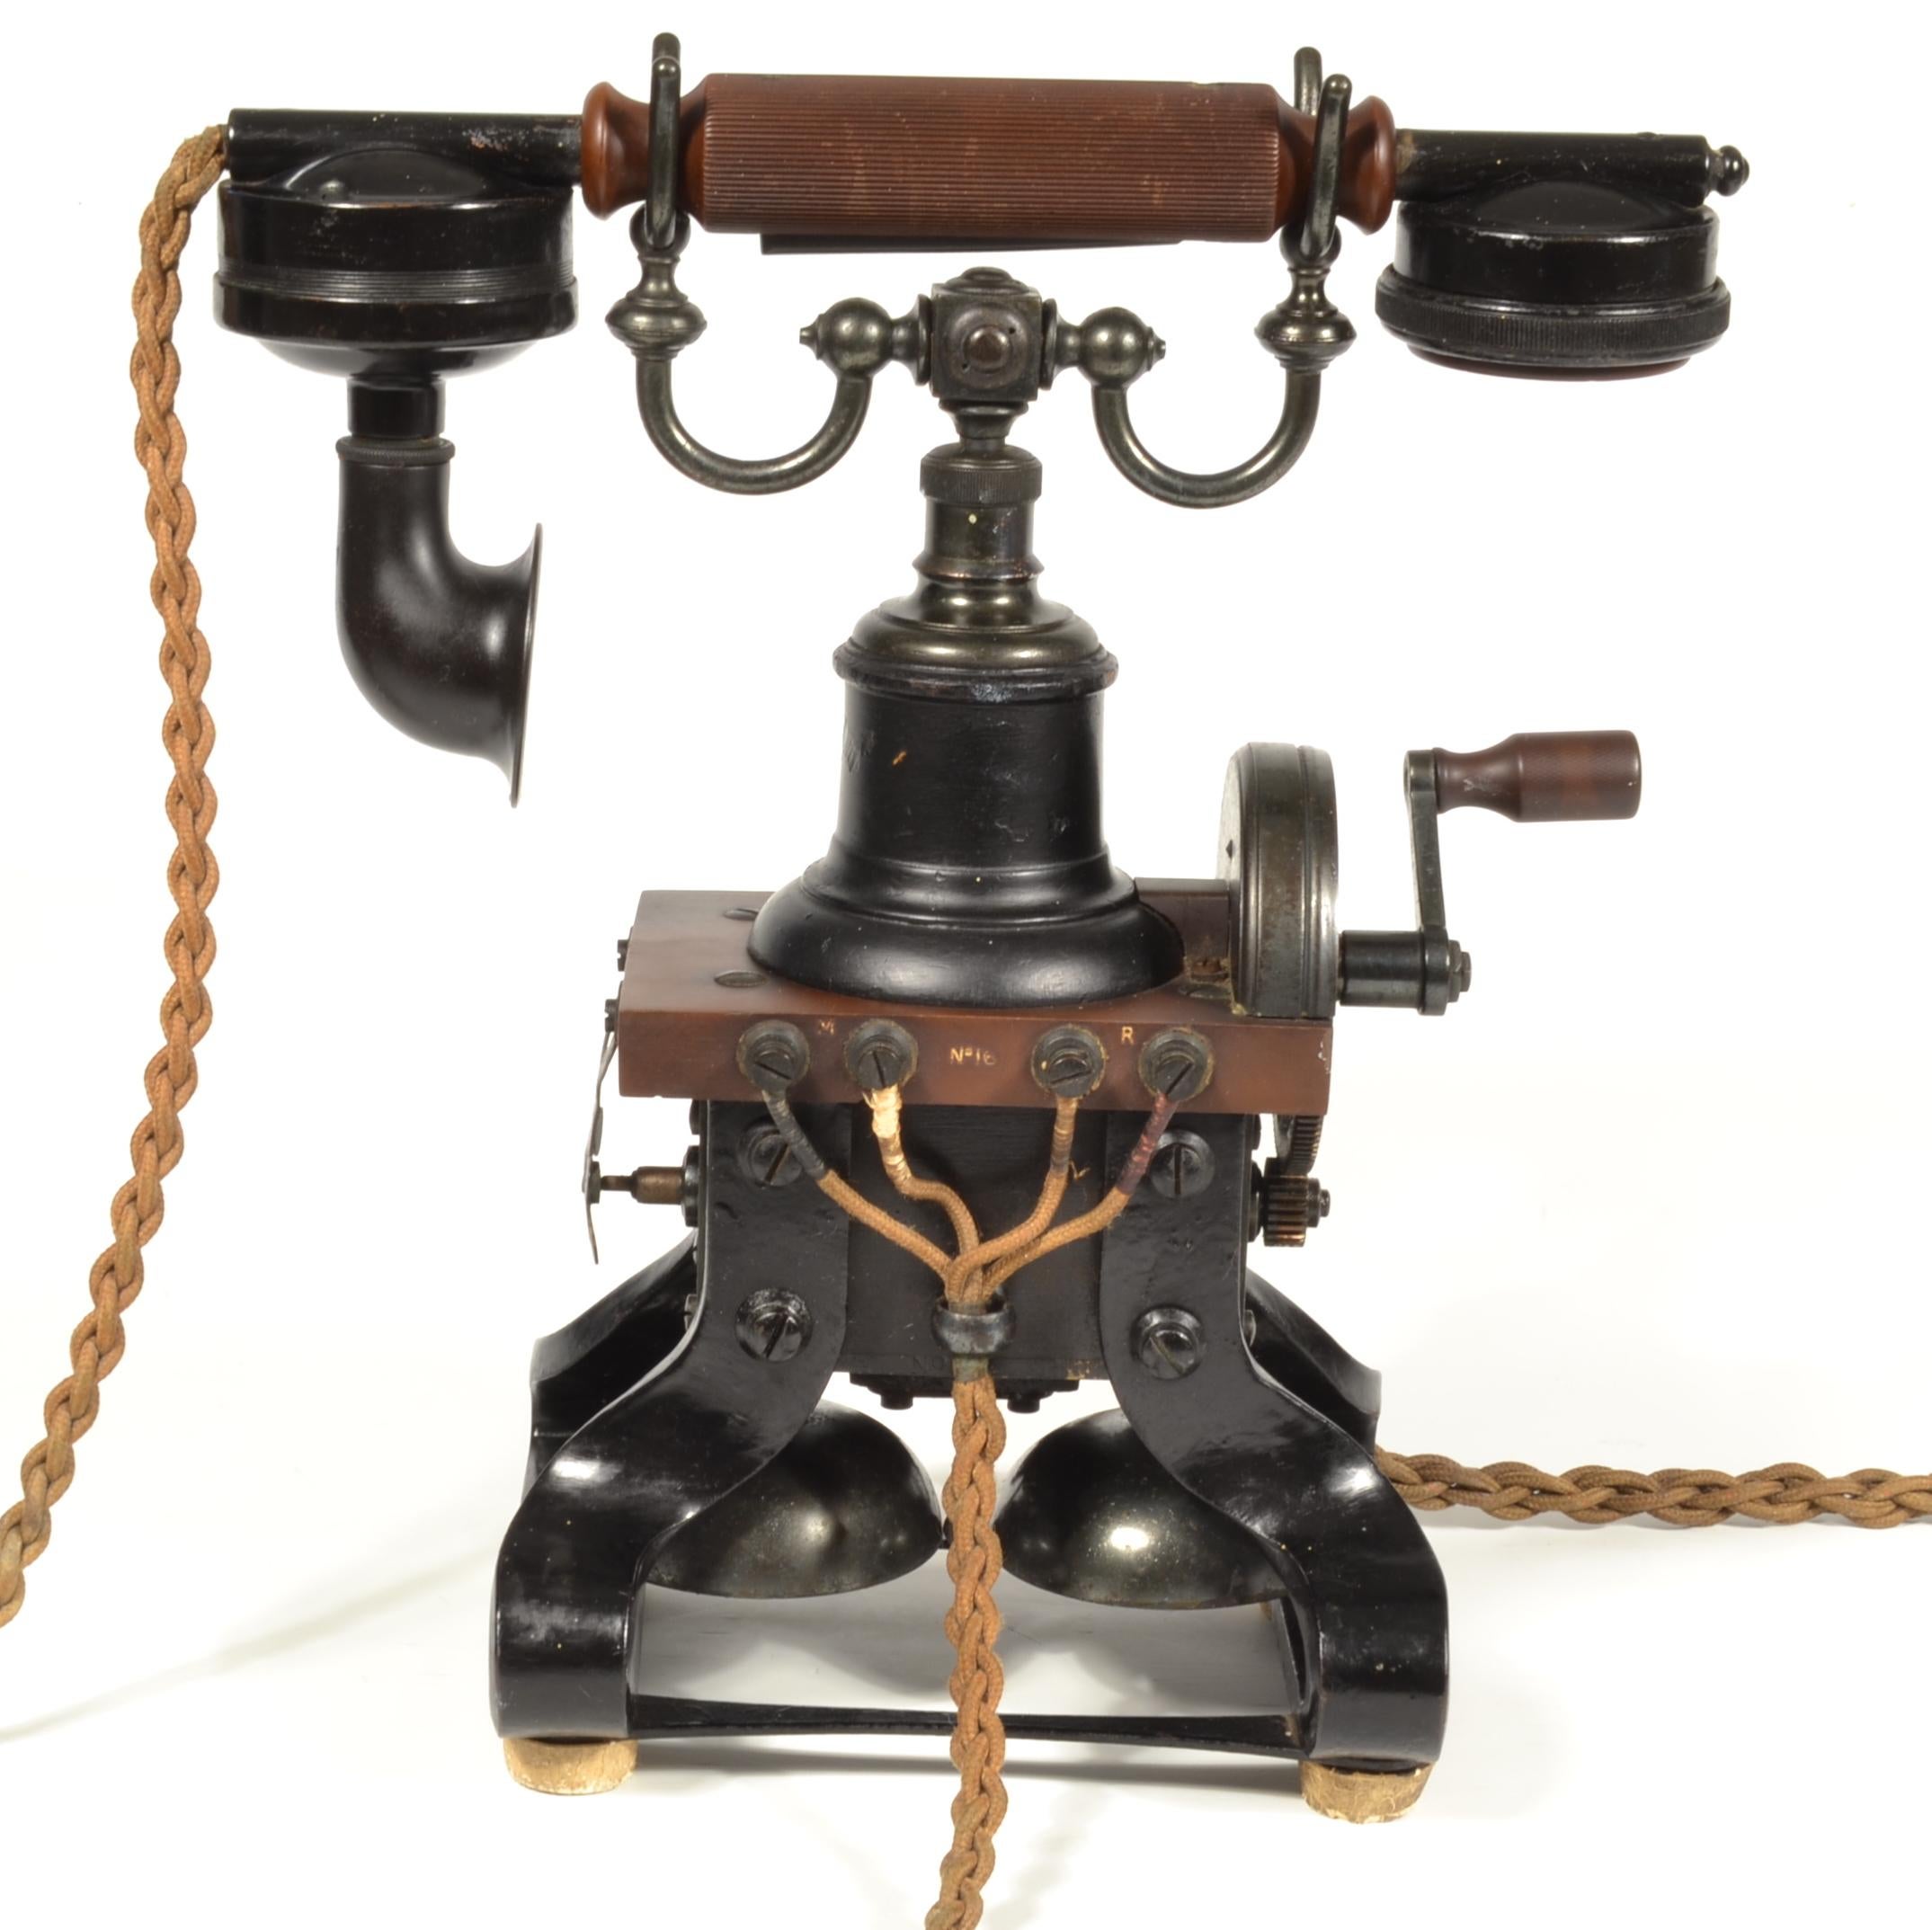 An early GPO type 16 telephone by Ericsson of Sweden. In very good original condition complete with wooden junction box and original leads. These phones have several colloquial names including the coffee grinder, Eiffel tower and skeleton to mention